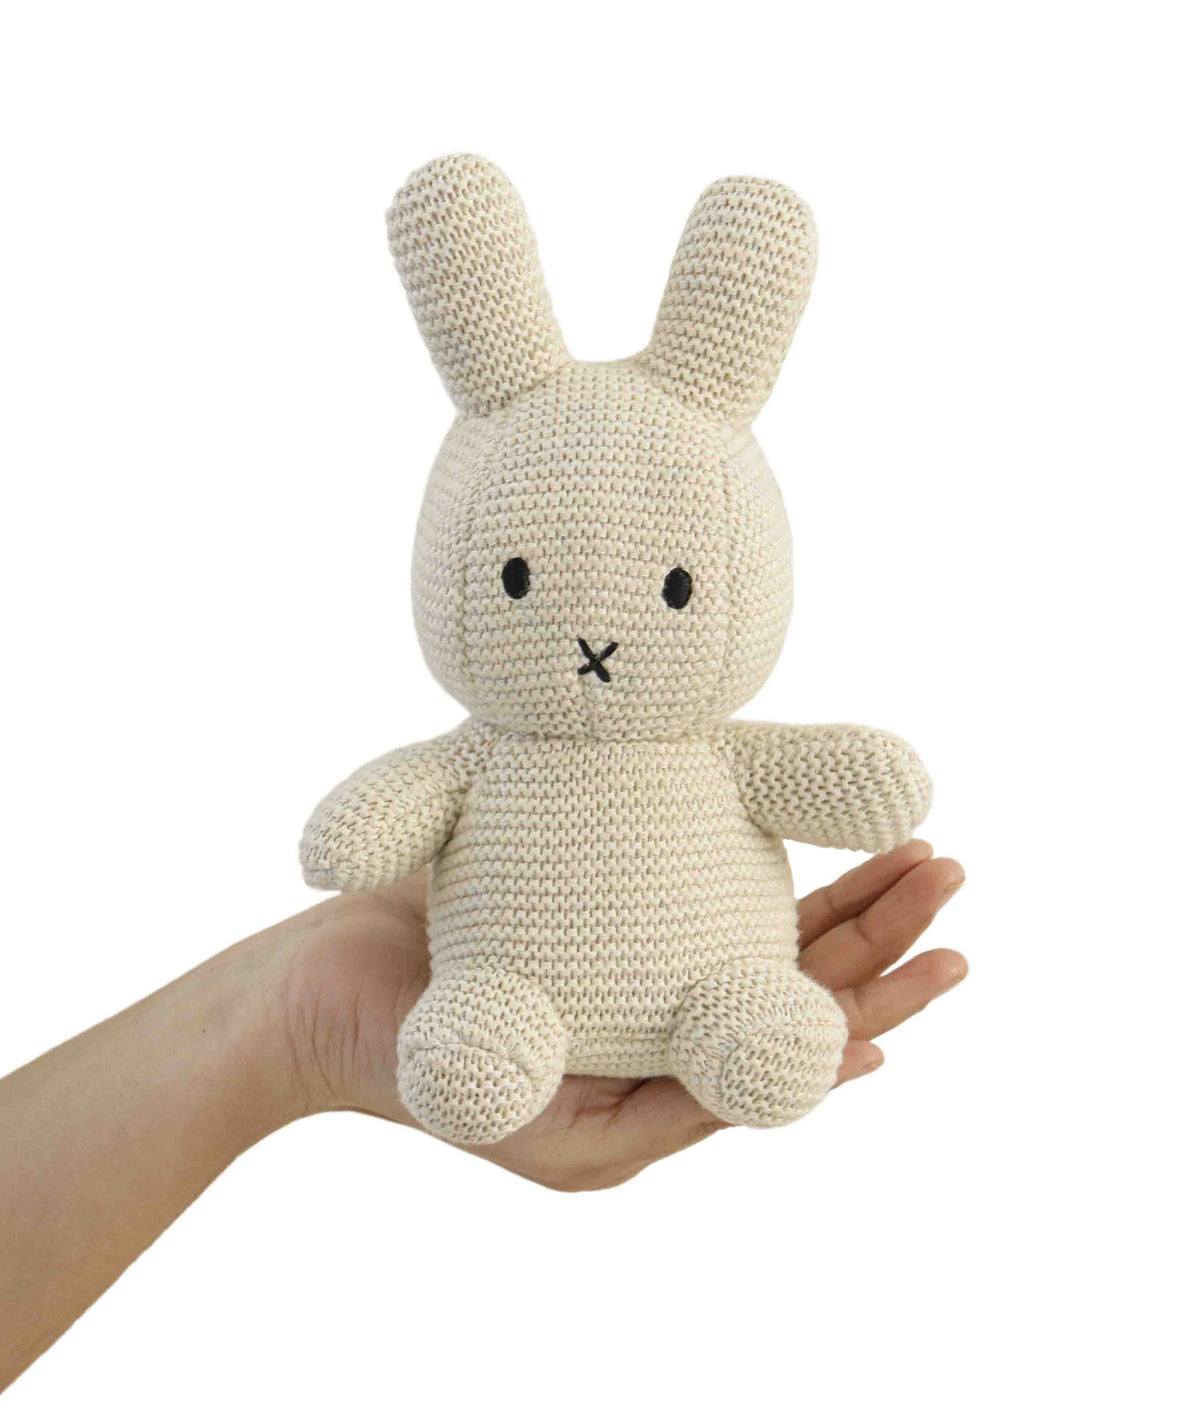 Rattle Bunny - Natural Melange Color 100% Cotton Knitted Stuffed Soft Toy for Babies / Kids (7" x 5")